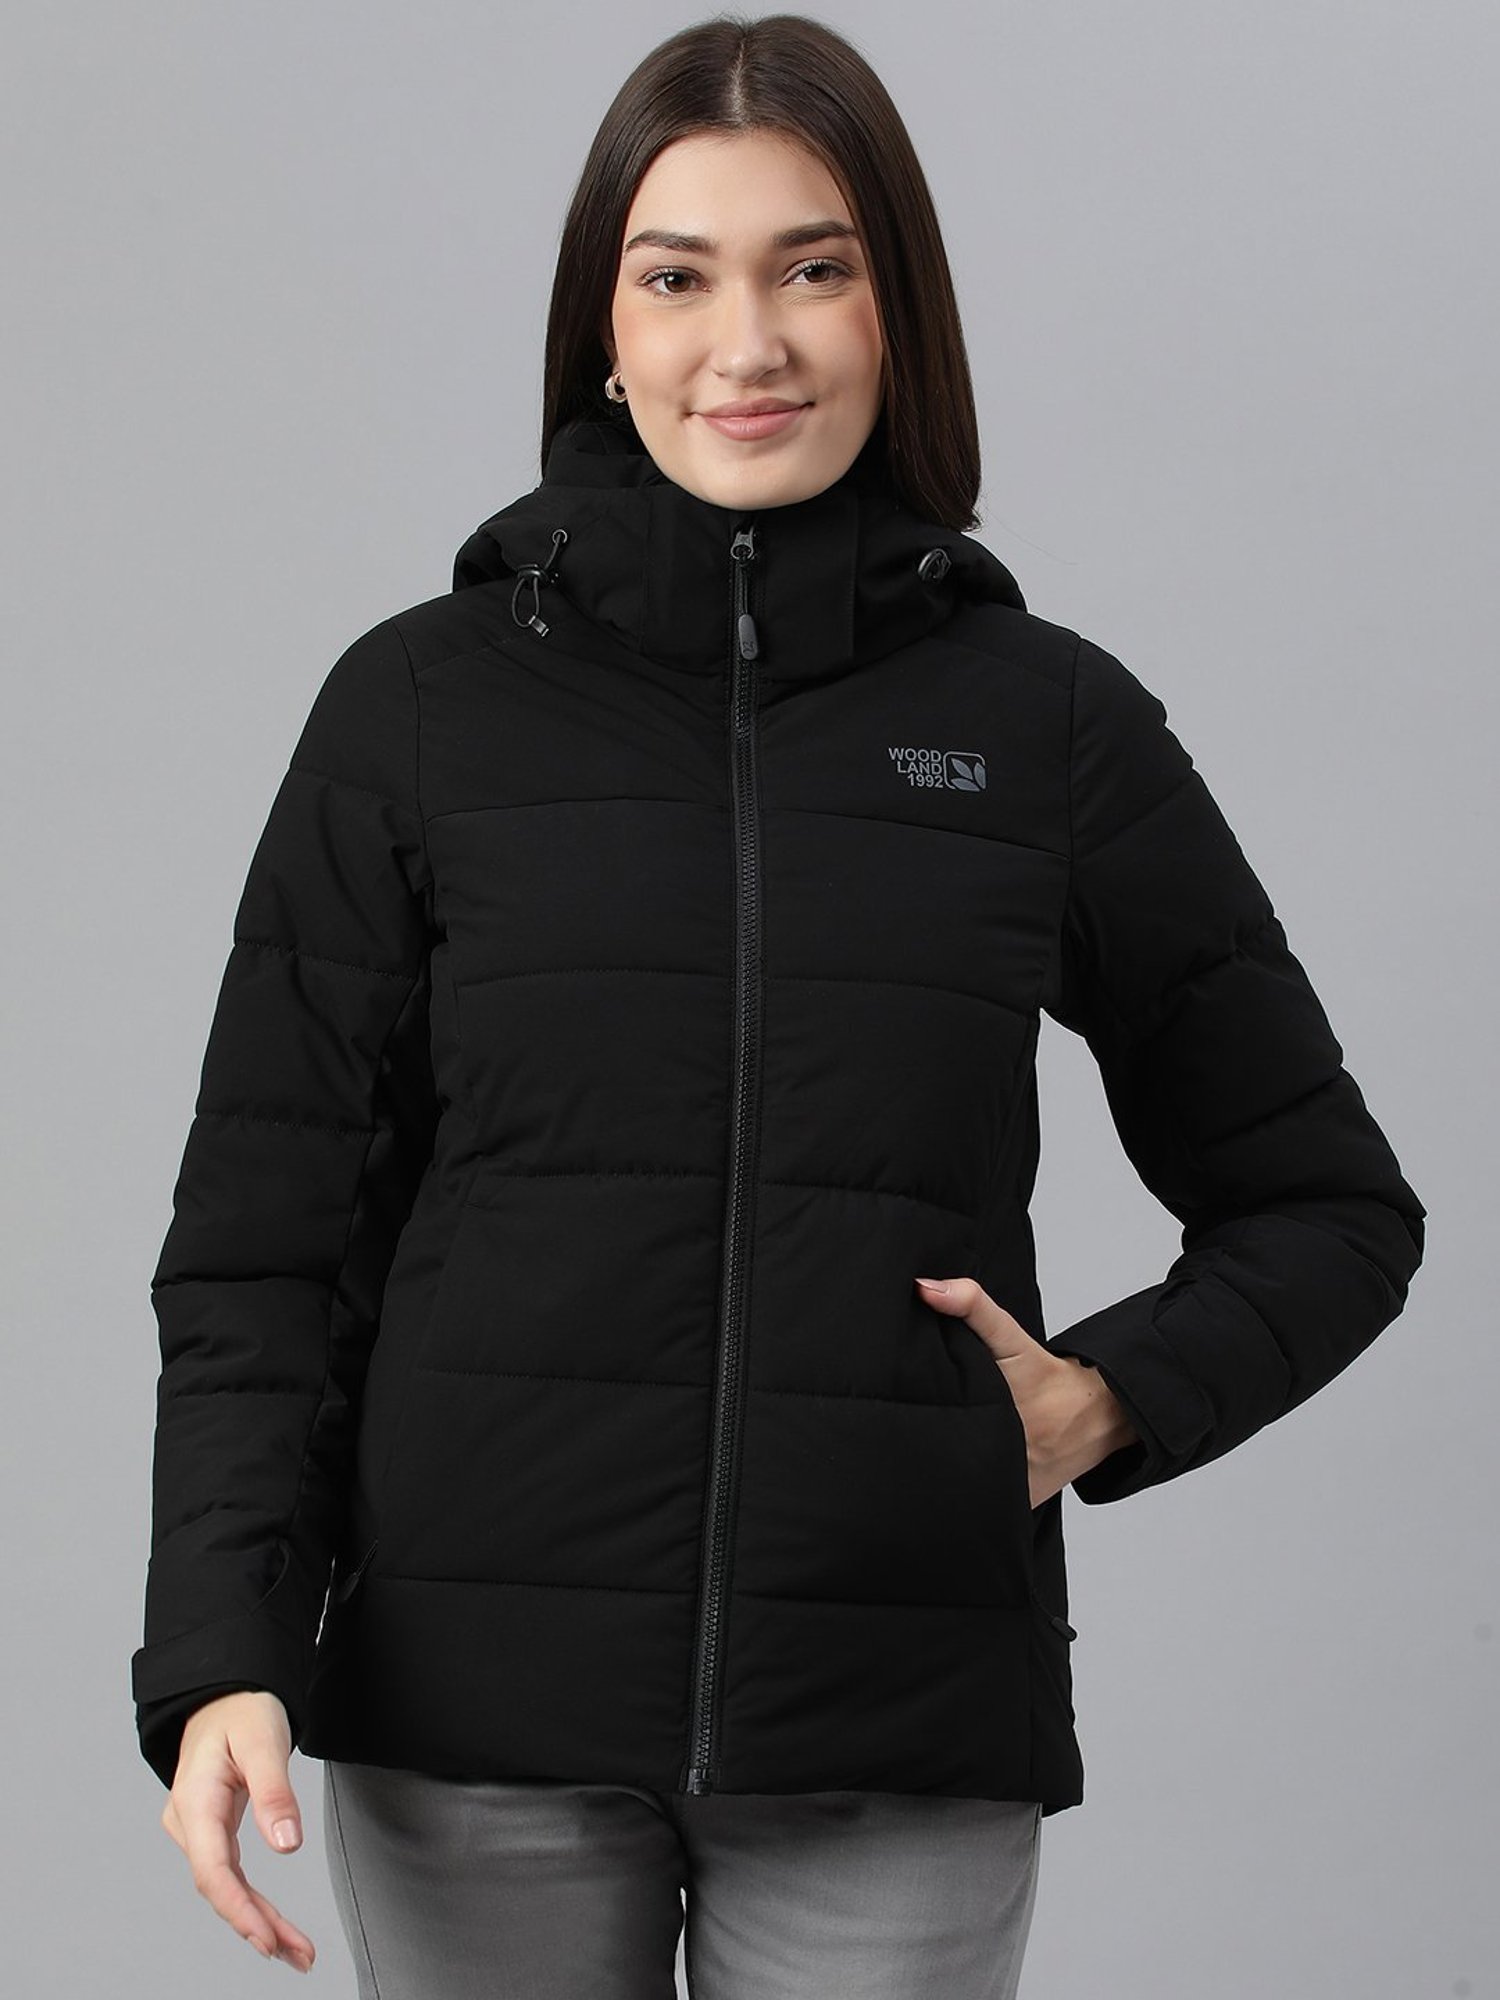 Women's Insulated Plush Jacket | Lands' End